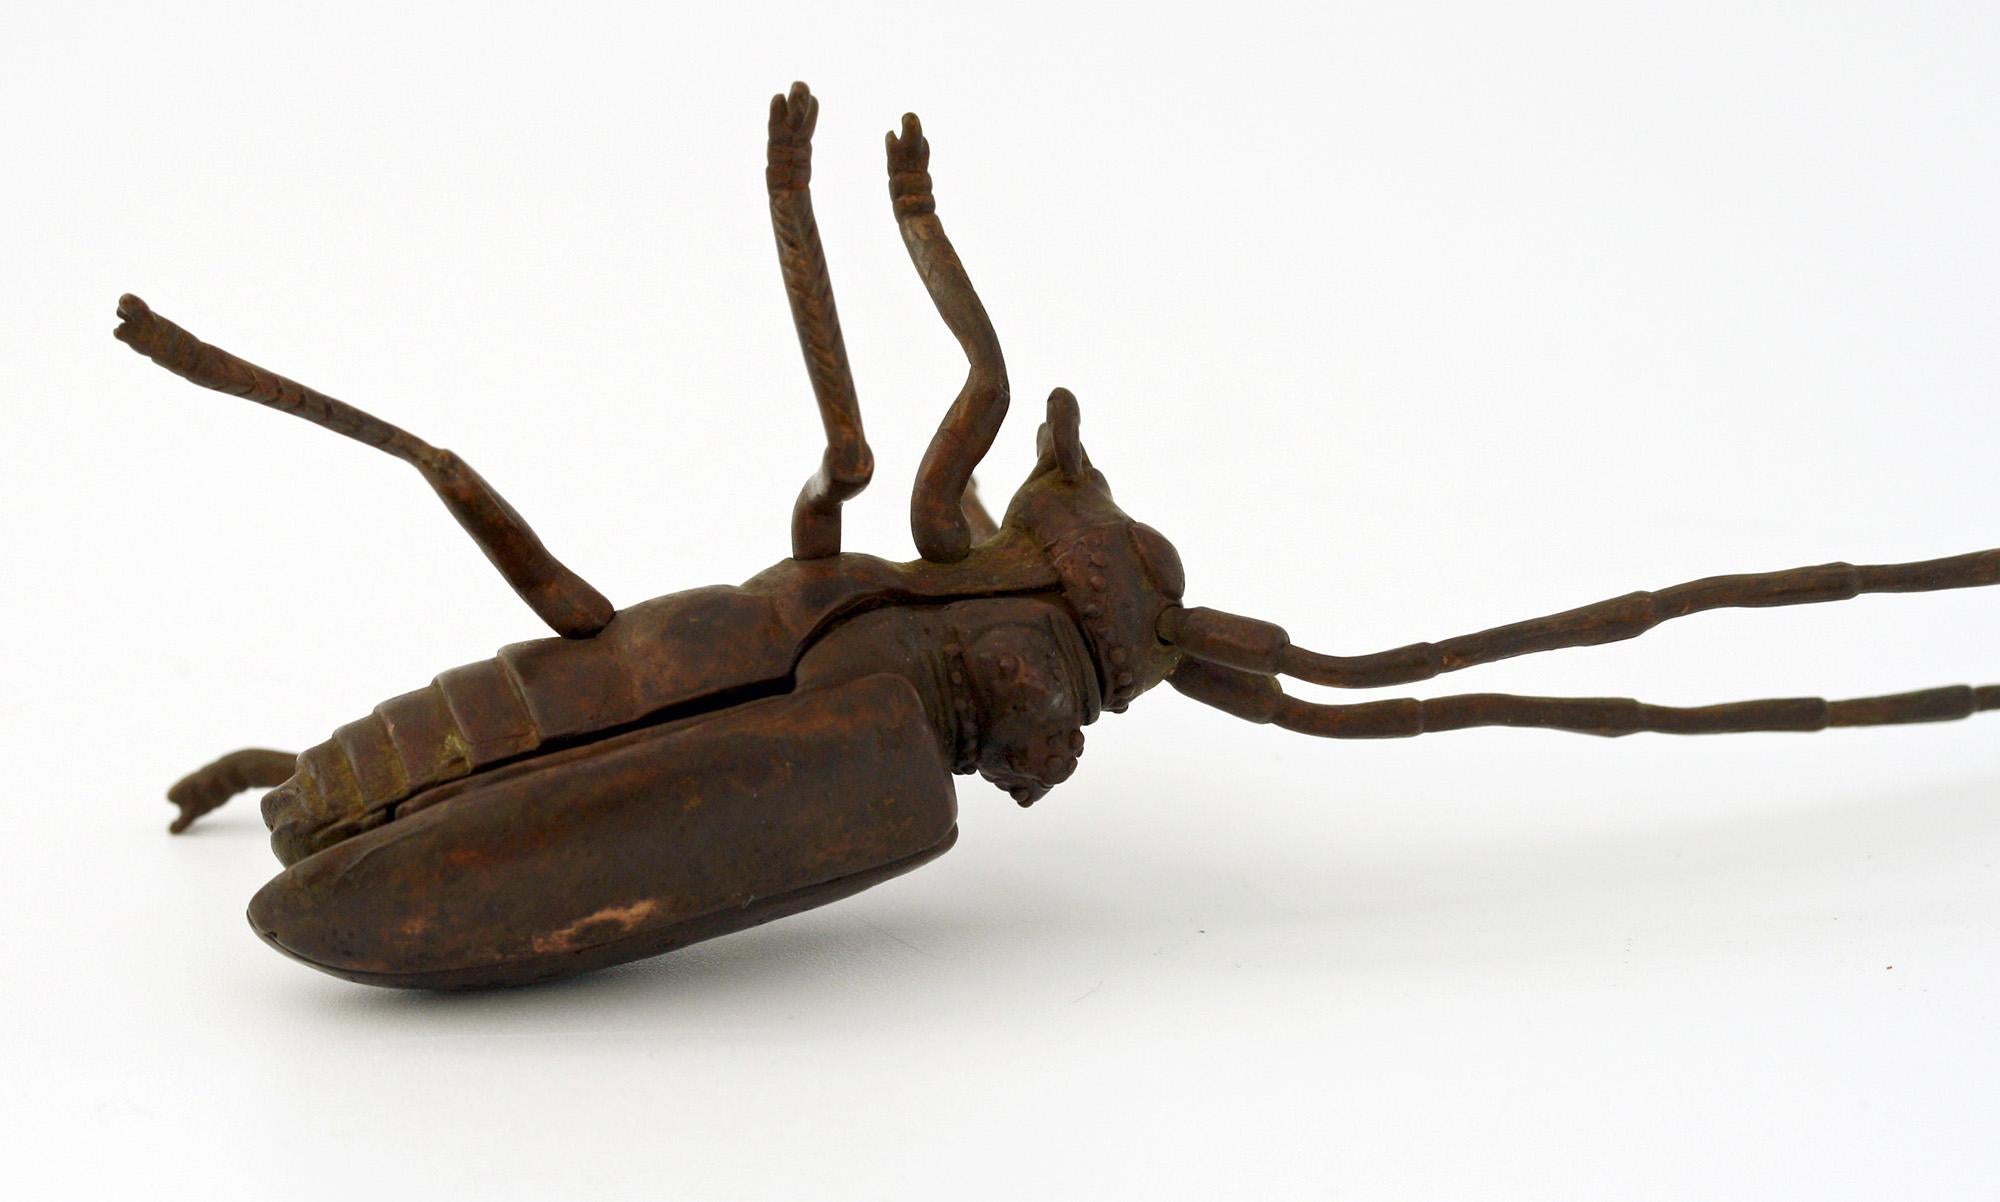 19th Century Japanese Meiji Articulated Bronzed Flying Beetle Figure, 1868-1912